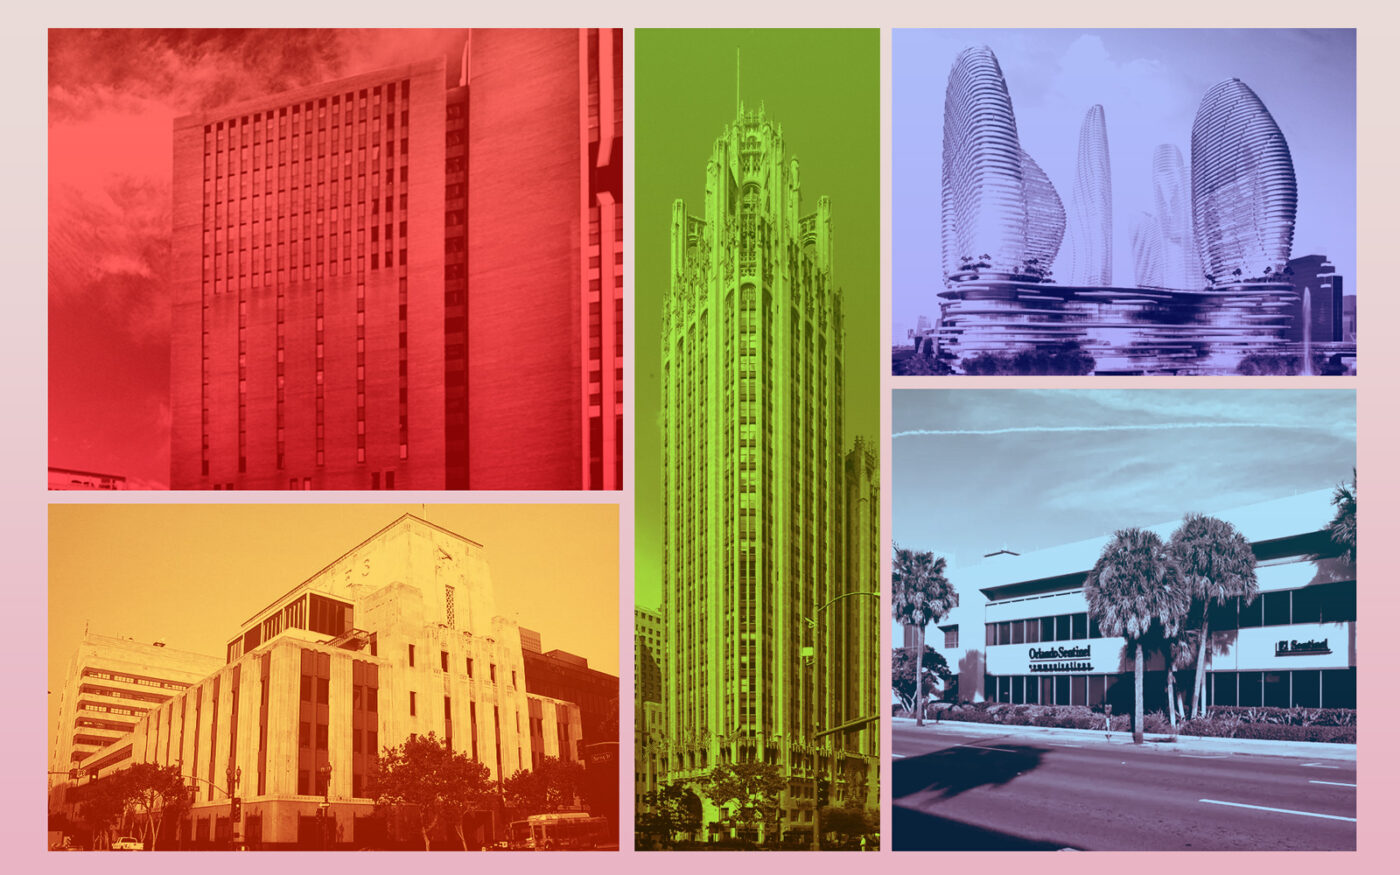 Clockwise from top left: 4 New York Plaza in New York, Tribune Tower in Chicago, a rendering of Resorts World Miami, The Orlando Sentinel at 610 North Orange Avenue in Miami, and the Times Mirror Square complex in Los Angeles